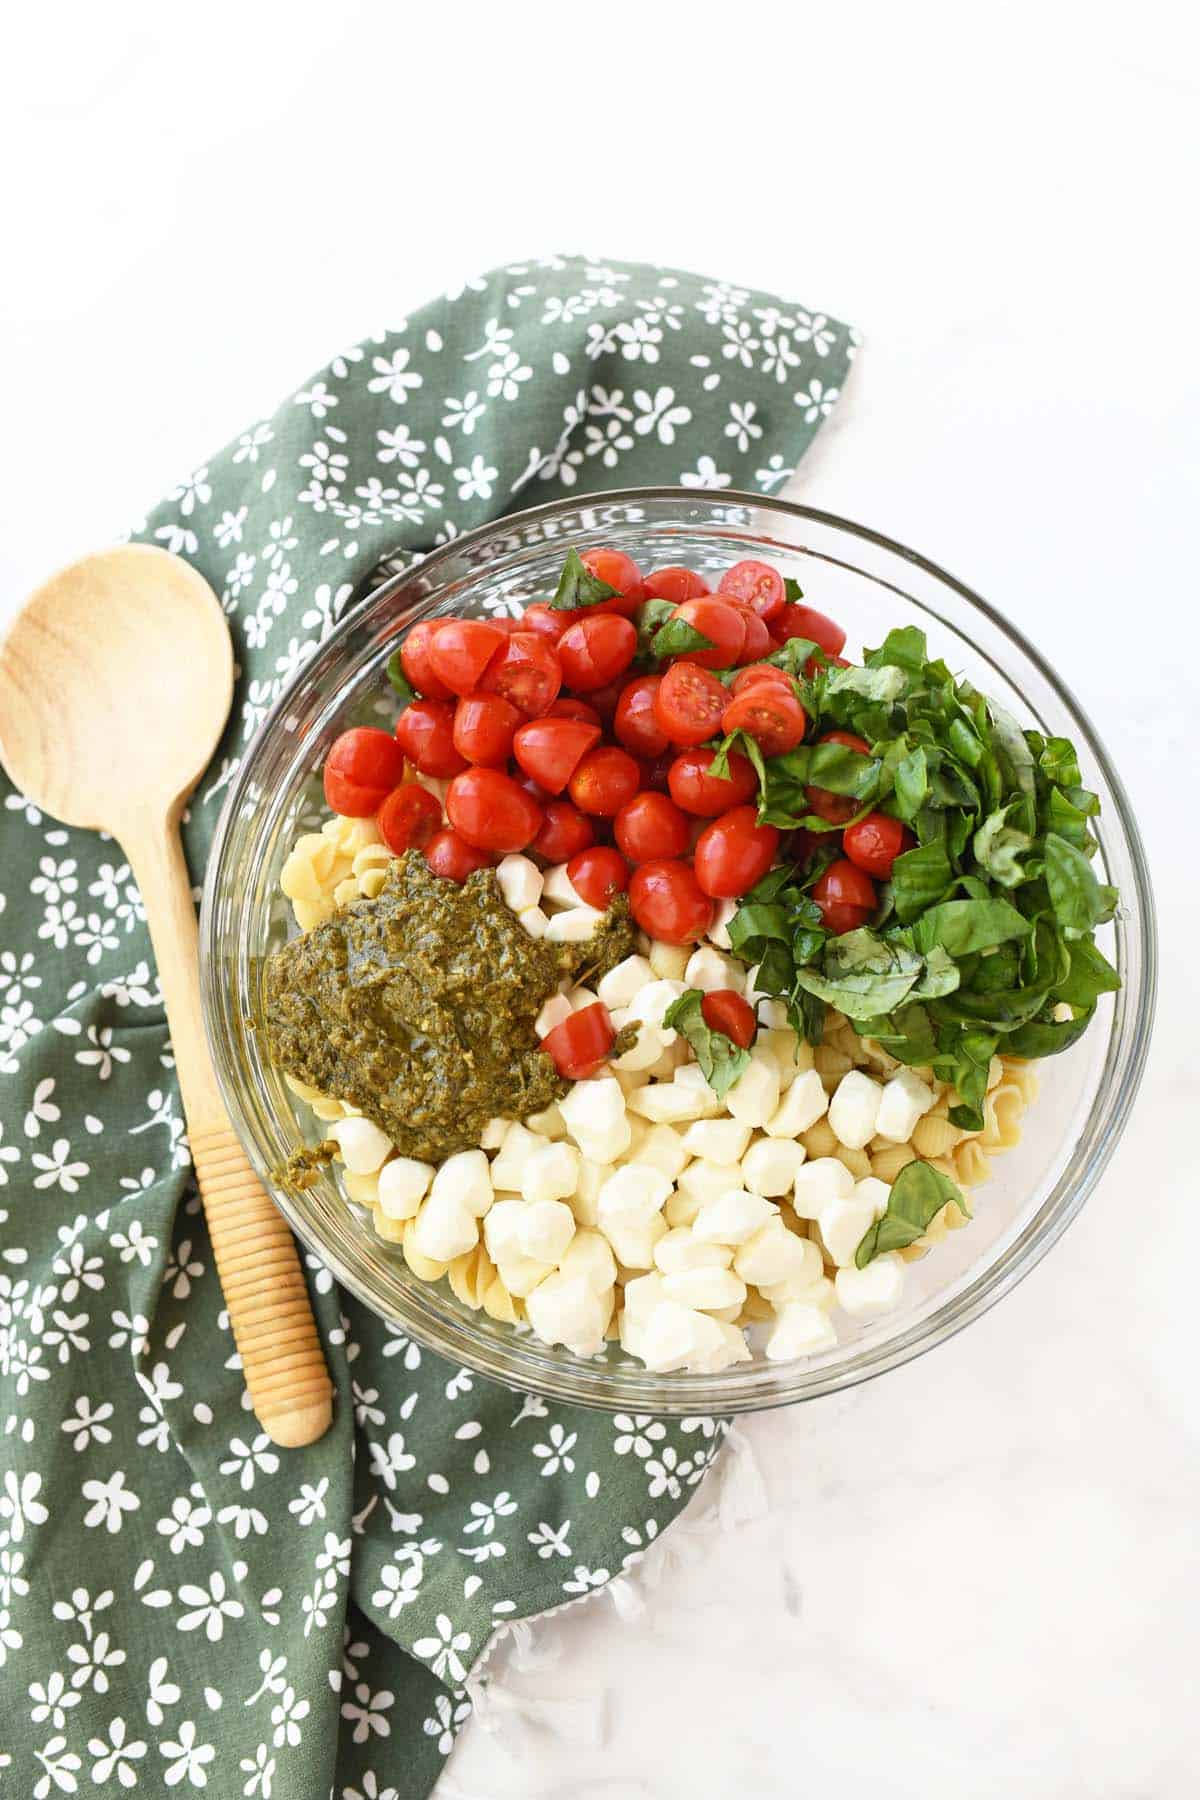 pesto salad ingredients in a glass bowl.